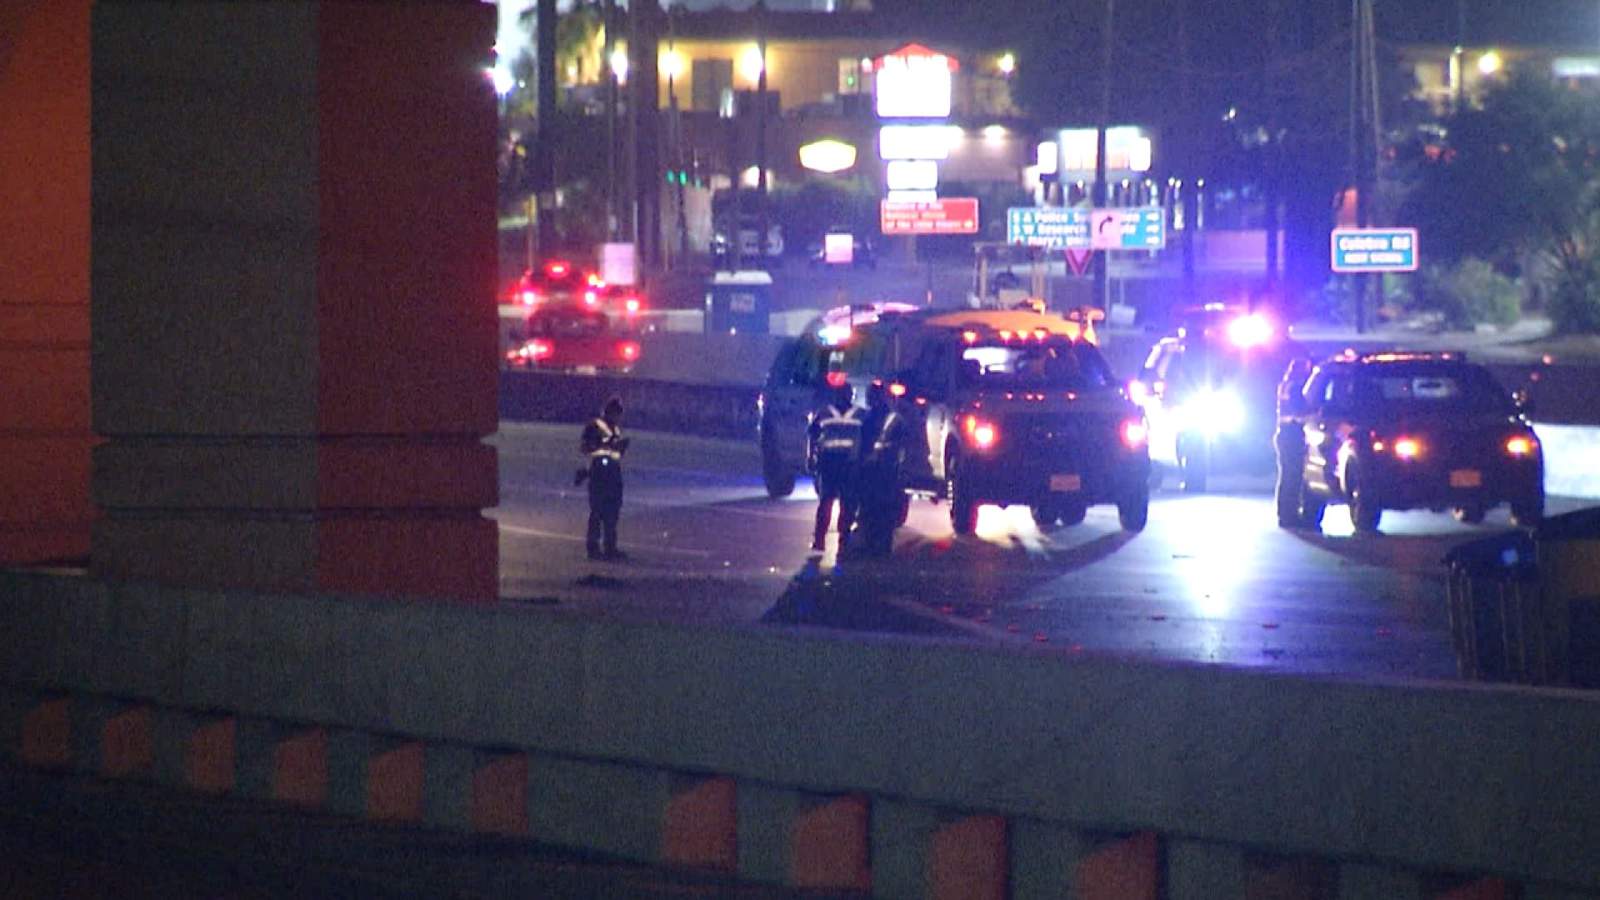 Man attempting to cross Loop 410 hit, killed by pickup truck, police say